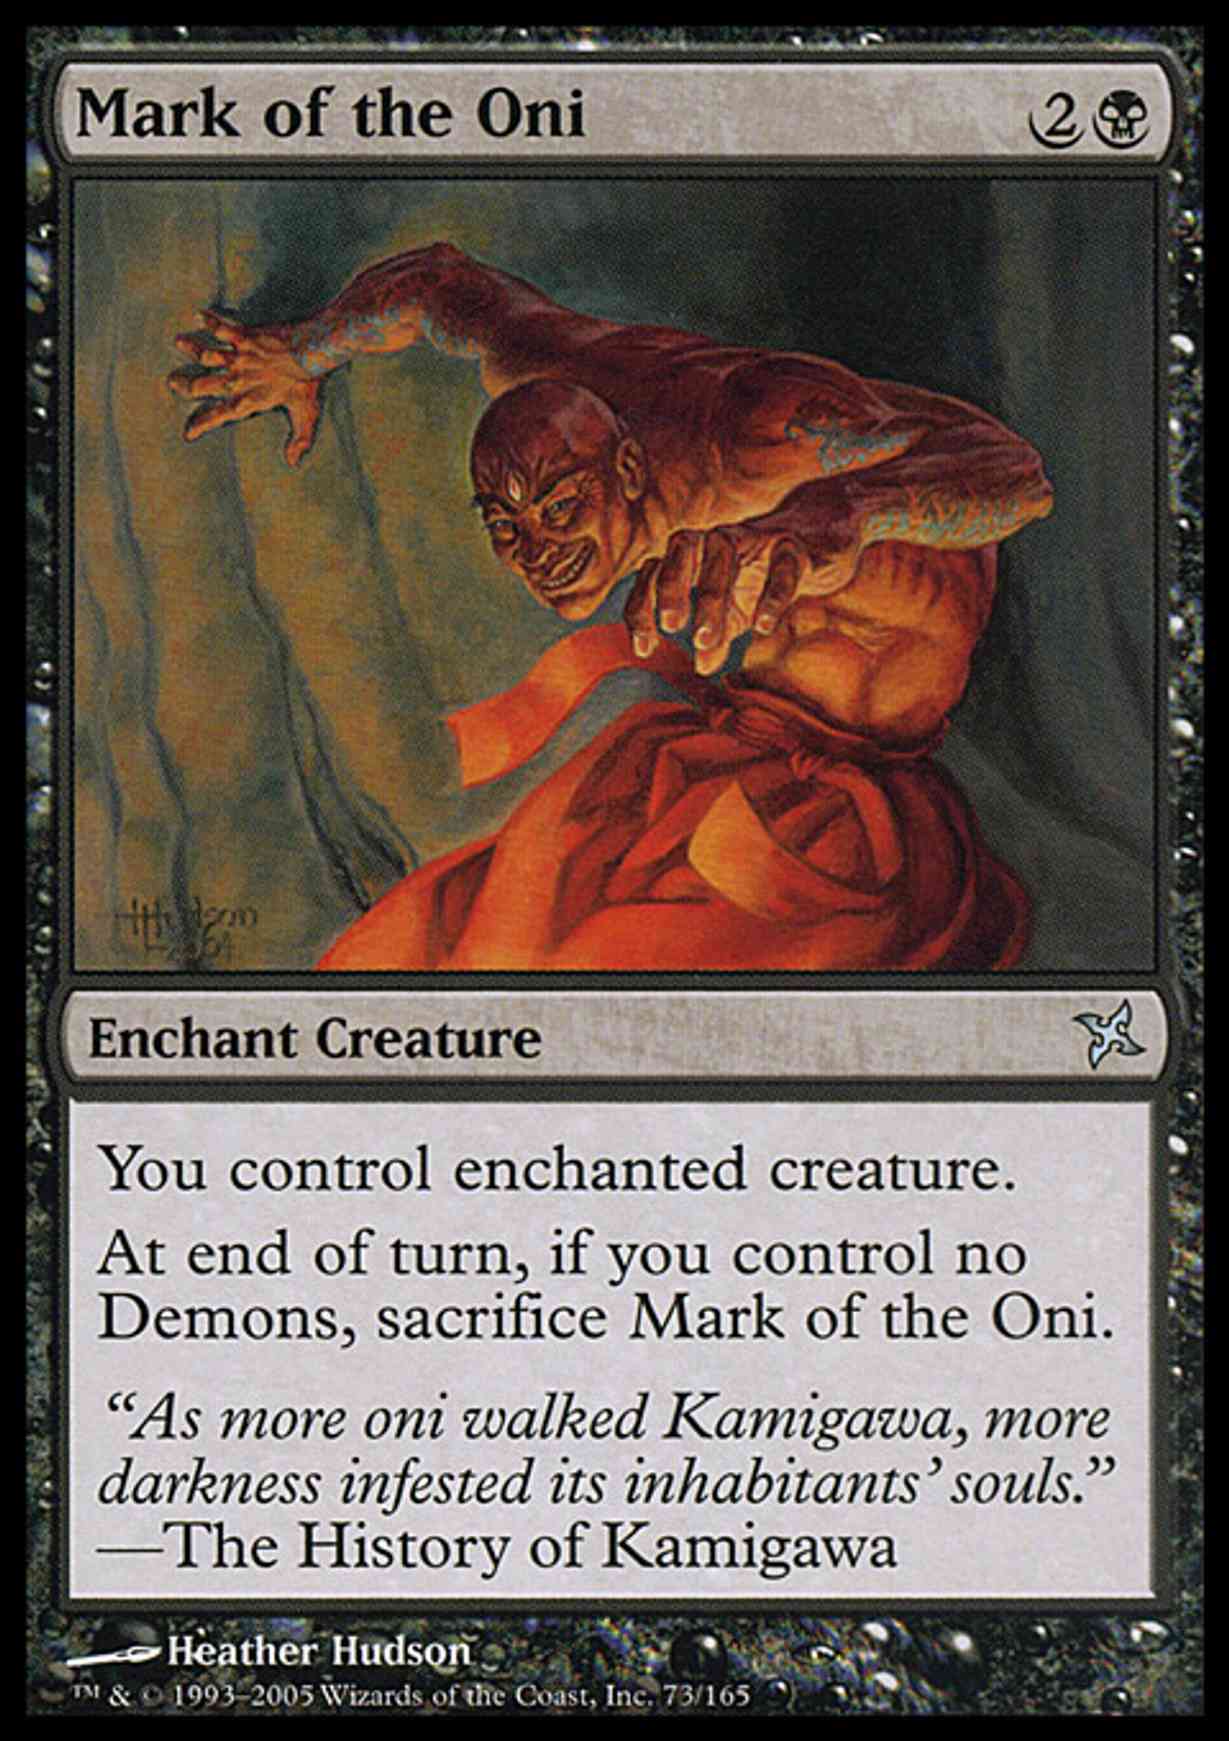 Mark of the Oni magic card front